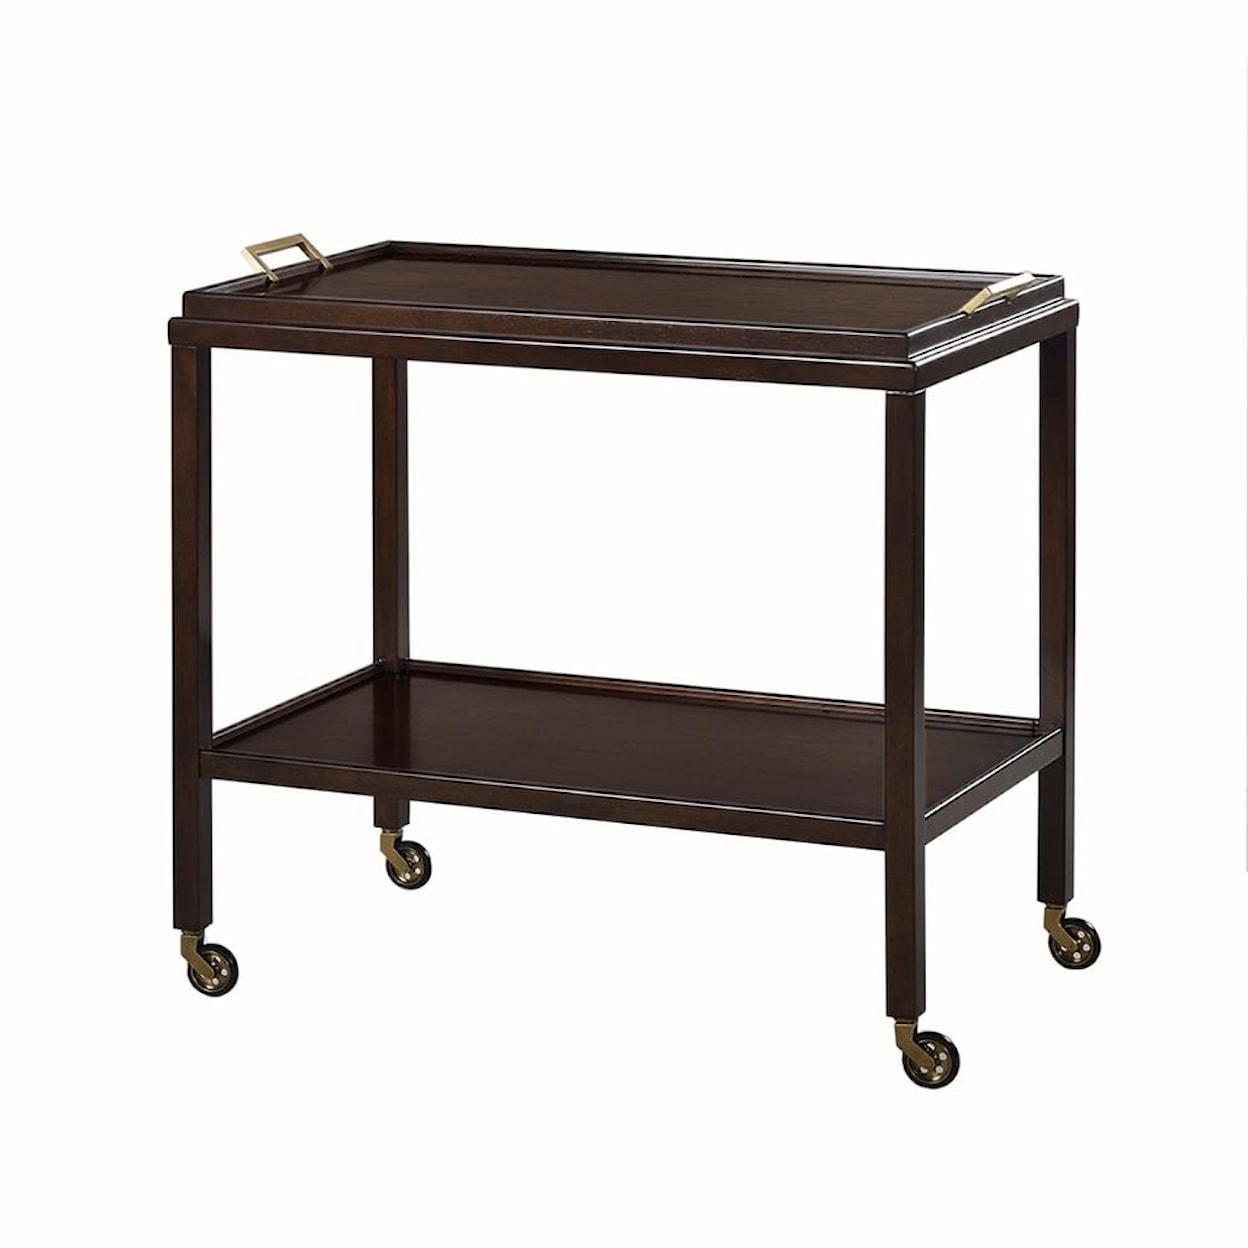 Oliver Home Furnishings Serving Carts SERVING CART- CHOCOLATE